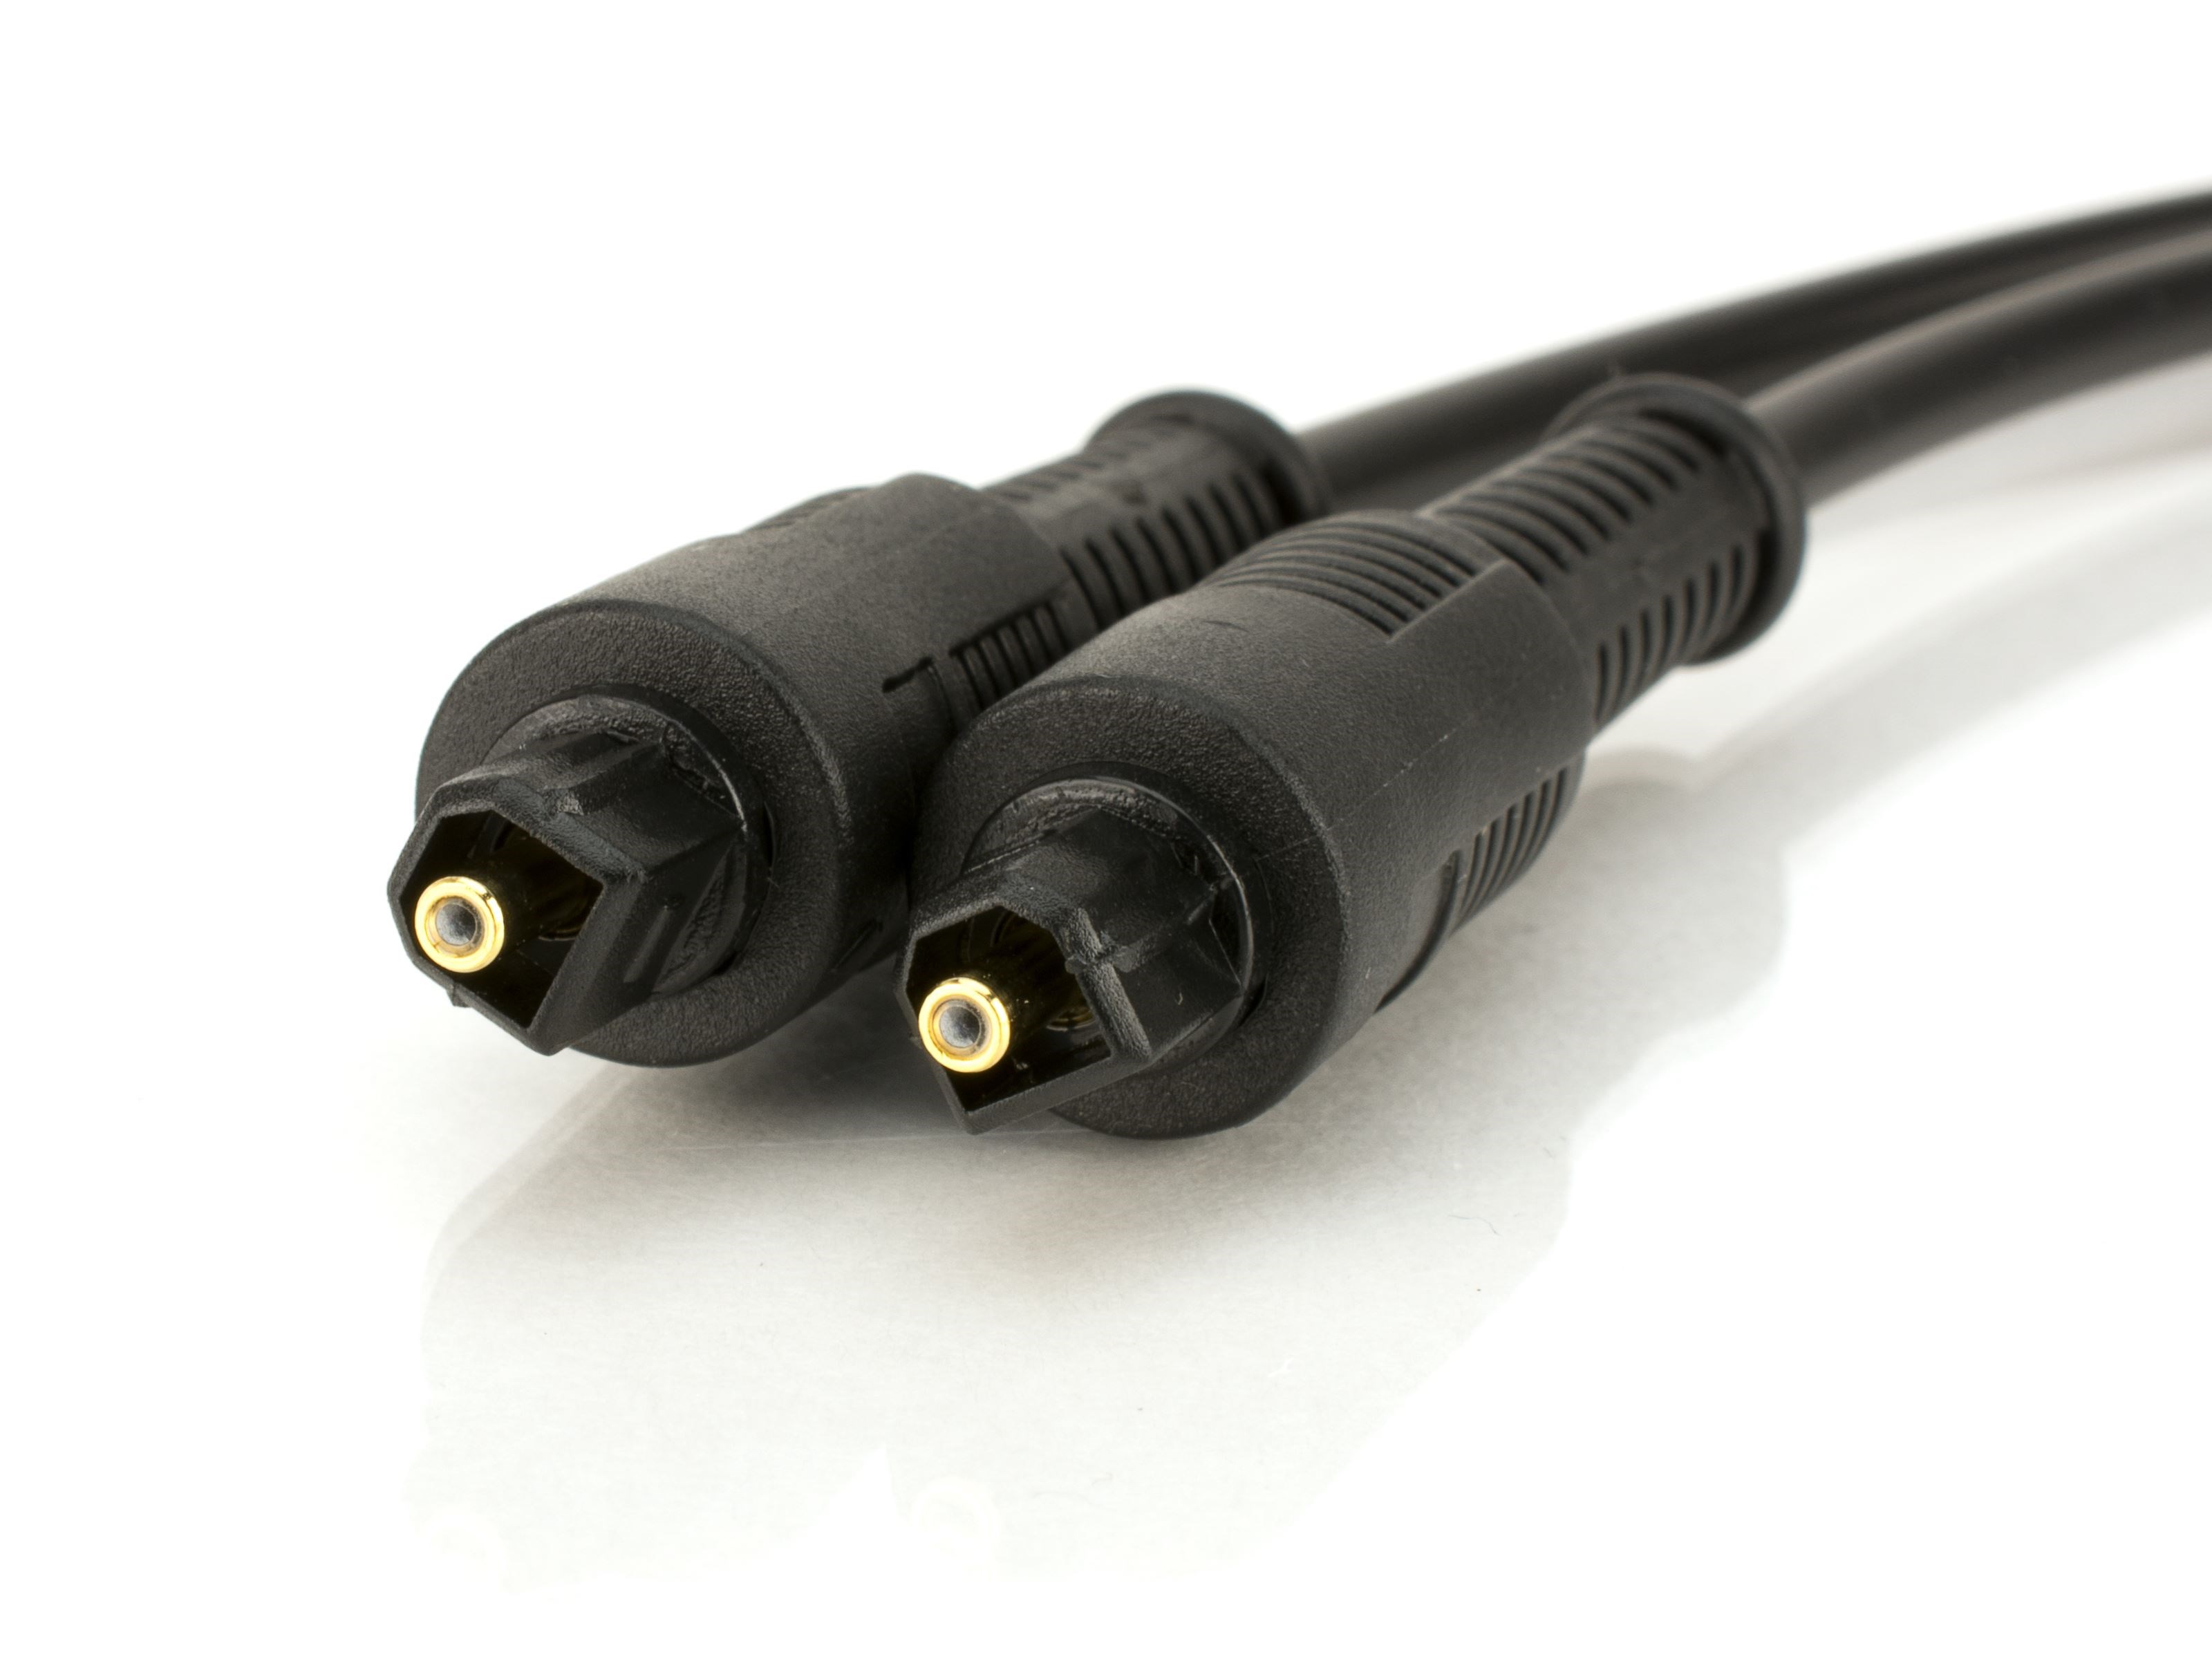 6 ft. Optical Audio Cable